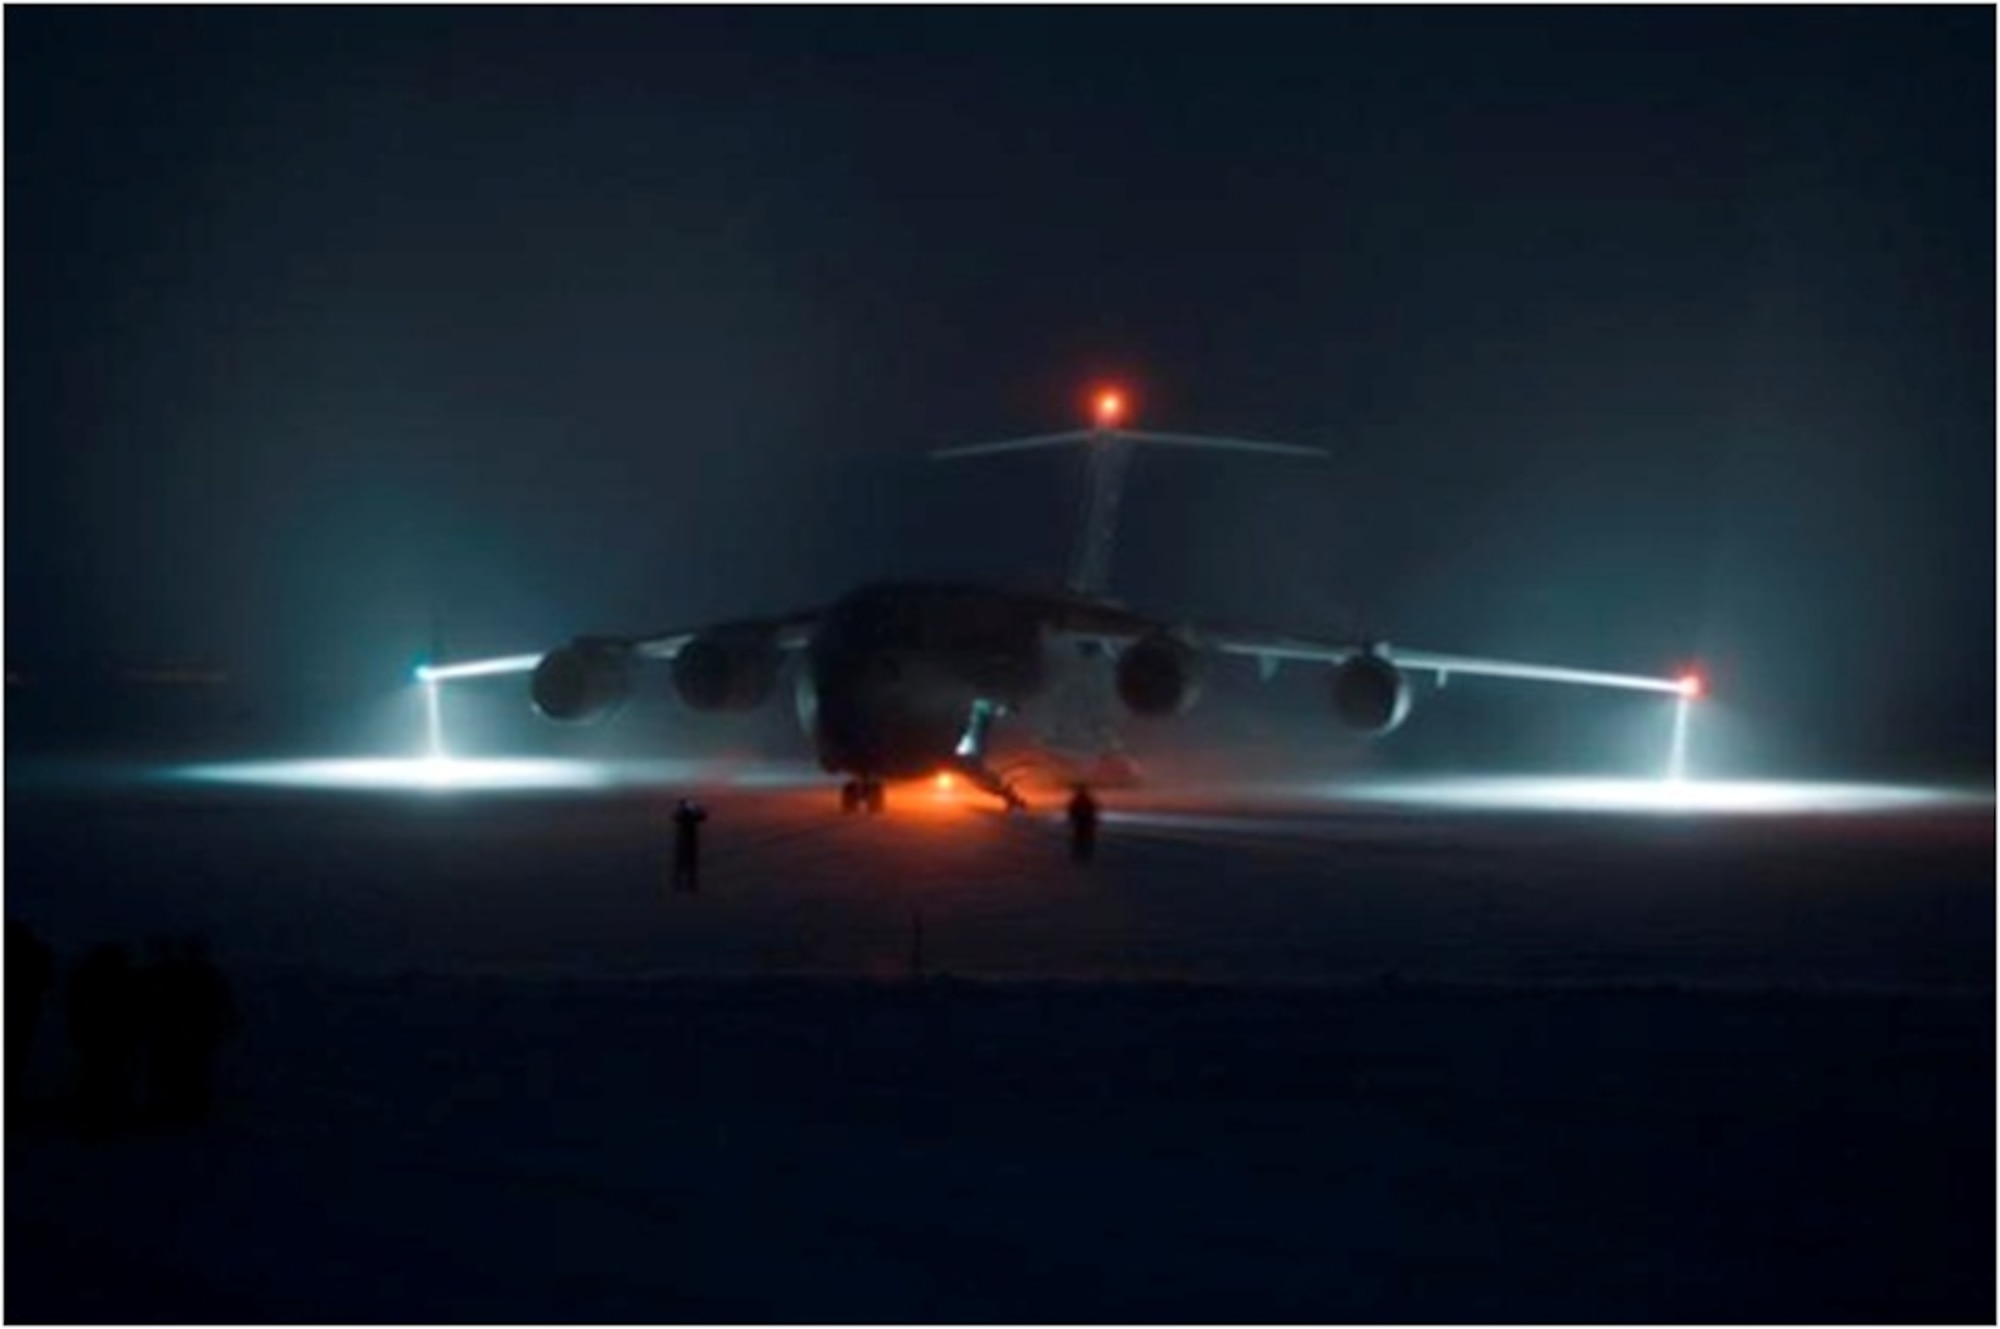 A C-17 Globemaster III from the 109th Airlift Wing at Stratton Air National Guard Base, N.Y., is parked at McMurdo Station, Antarctica, as part of Operation Deep Freeze 2010-2011.  ODF is the U.S. military's operational and logistic support of the NSF's scientific research activities in Antarctica. (U.S. Air Force photo/  Lt. Col. Robert Wellington) 

